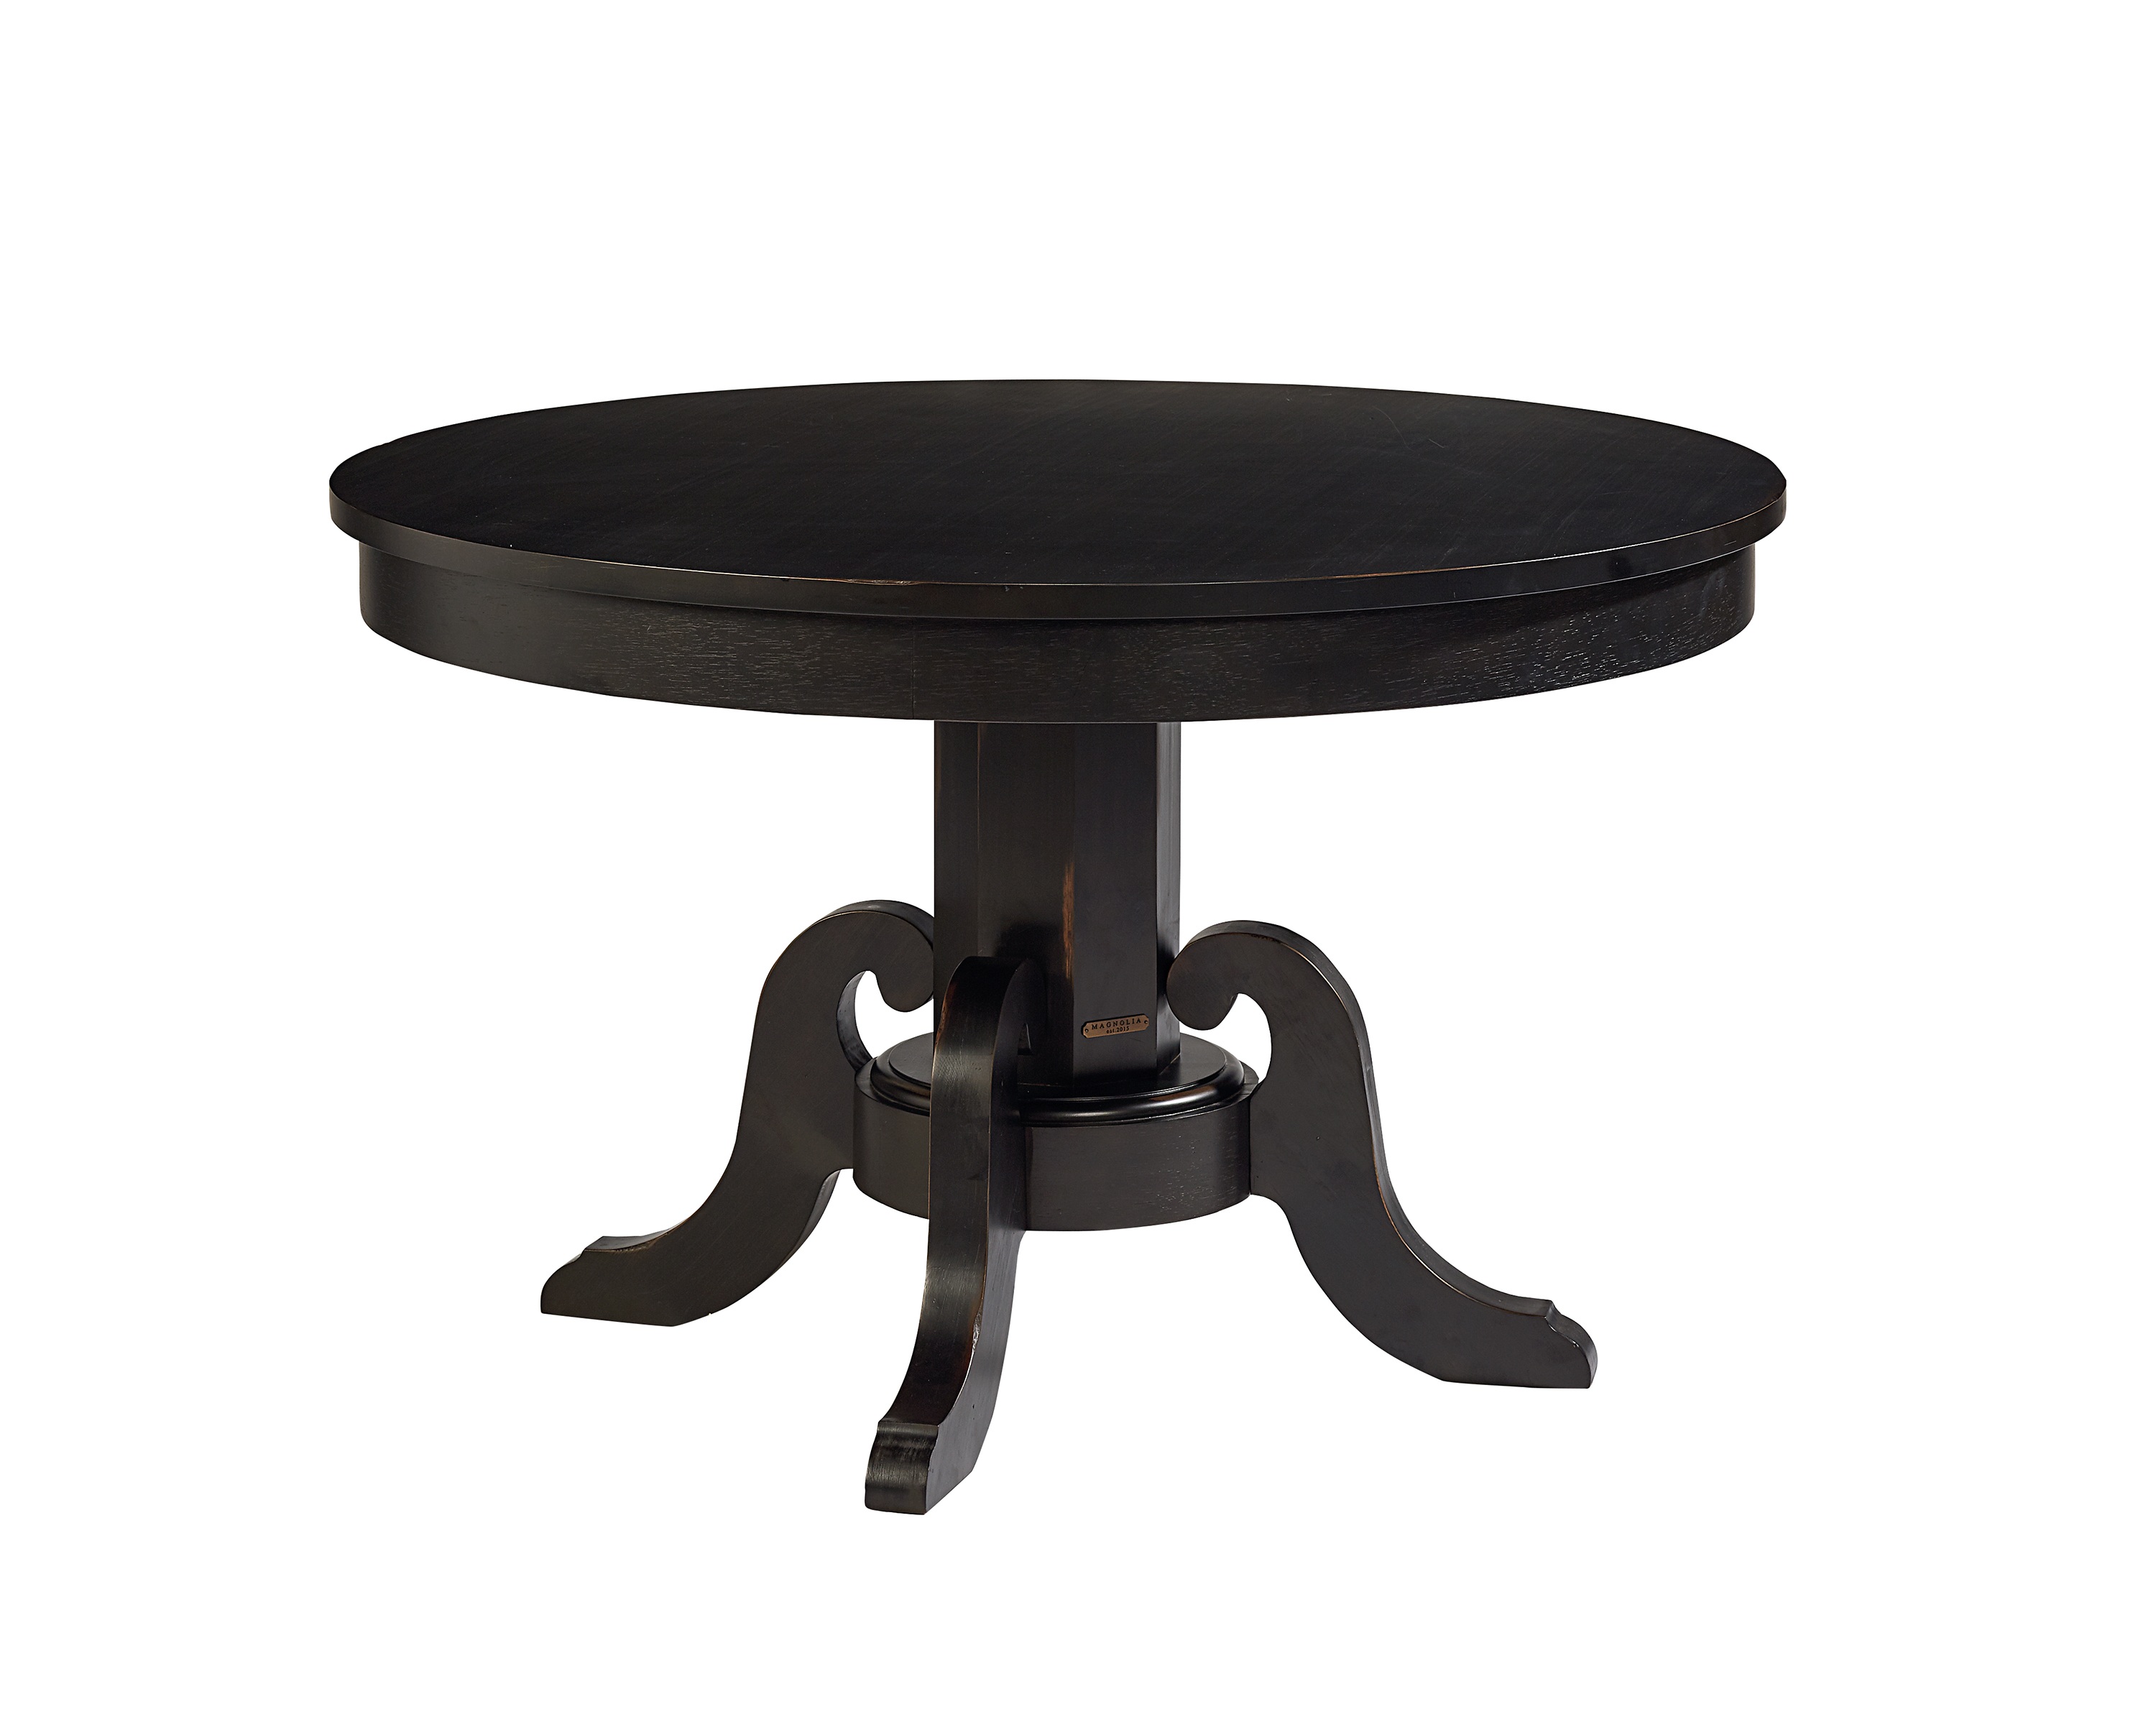 small oak accent gustav table modern relik antique pedestal tall tables bedside remarkable distressed large round diy unfinished black end wood stunning target chair covers drop